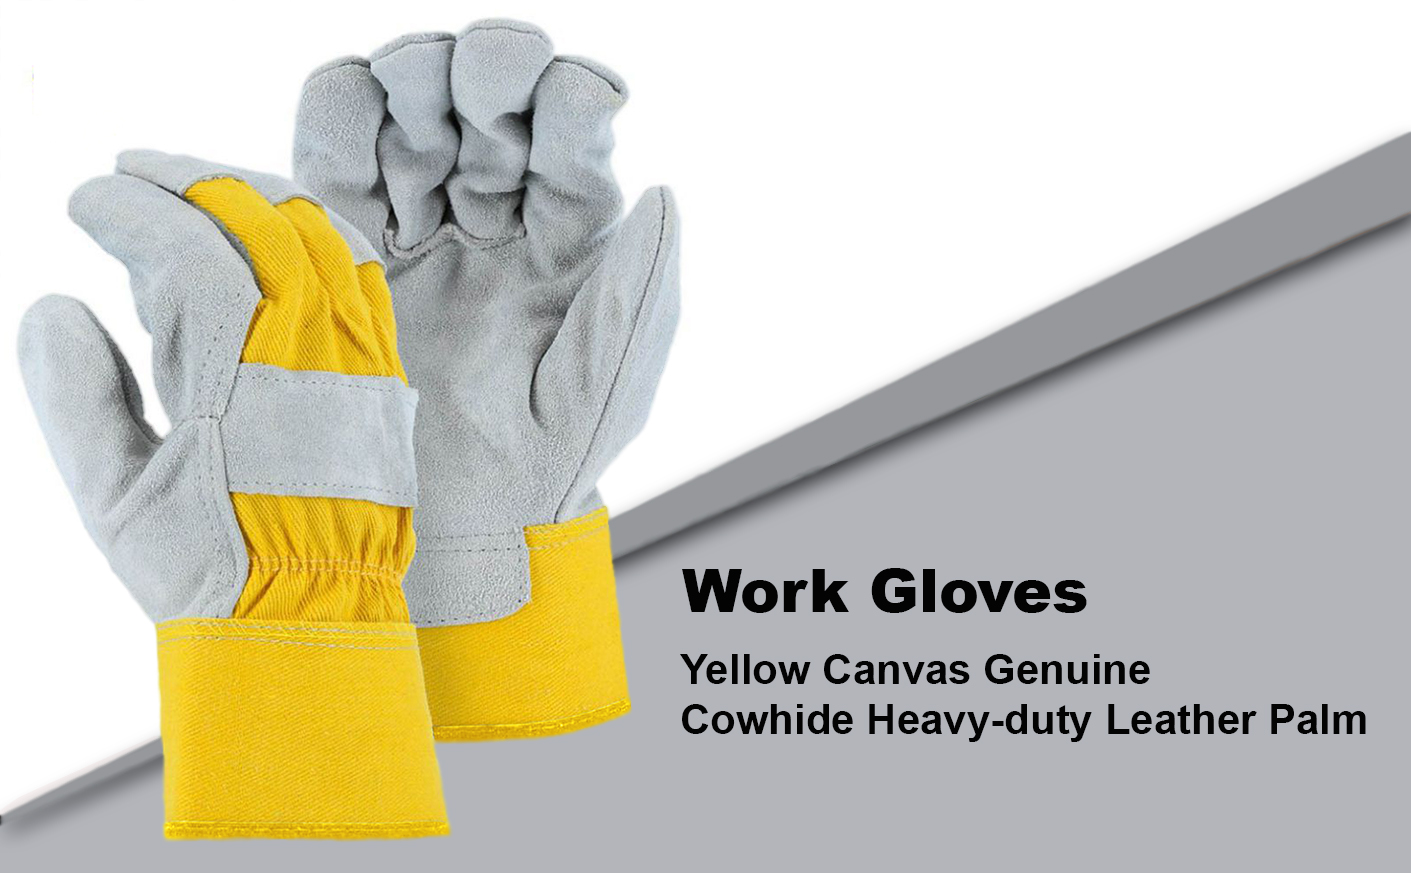 WOLF Yellow Canvas Genuine Cowhide Heavy-duty Shoulder Leather Palm Work Gloves with Wing Thumb/Index Finger and Safety Cuff Quick One Safety